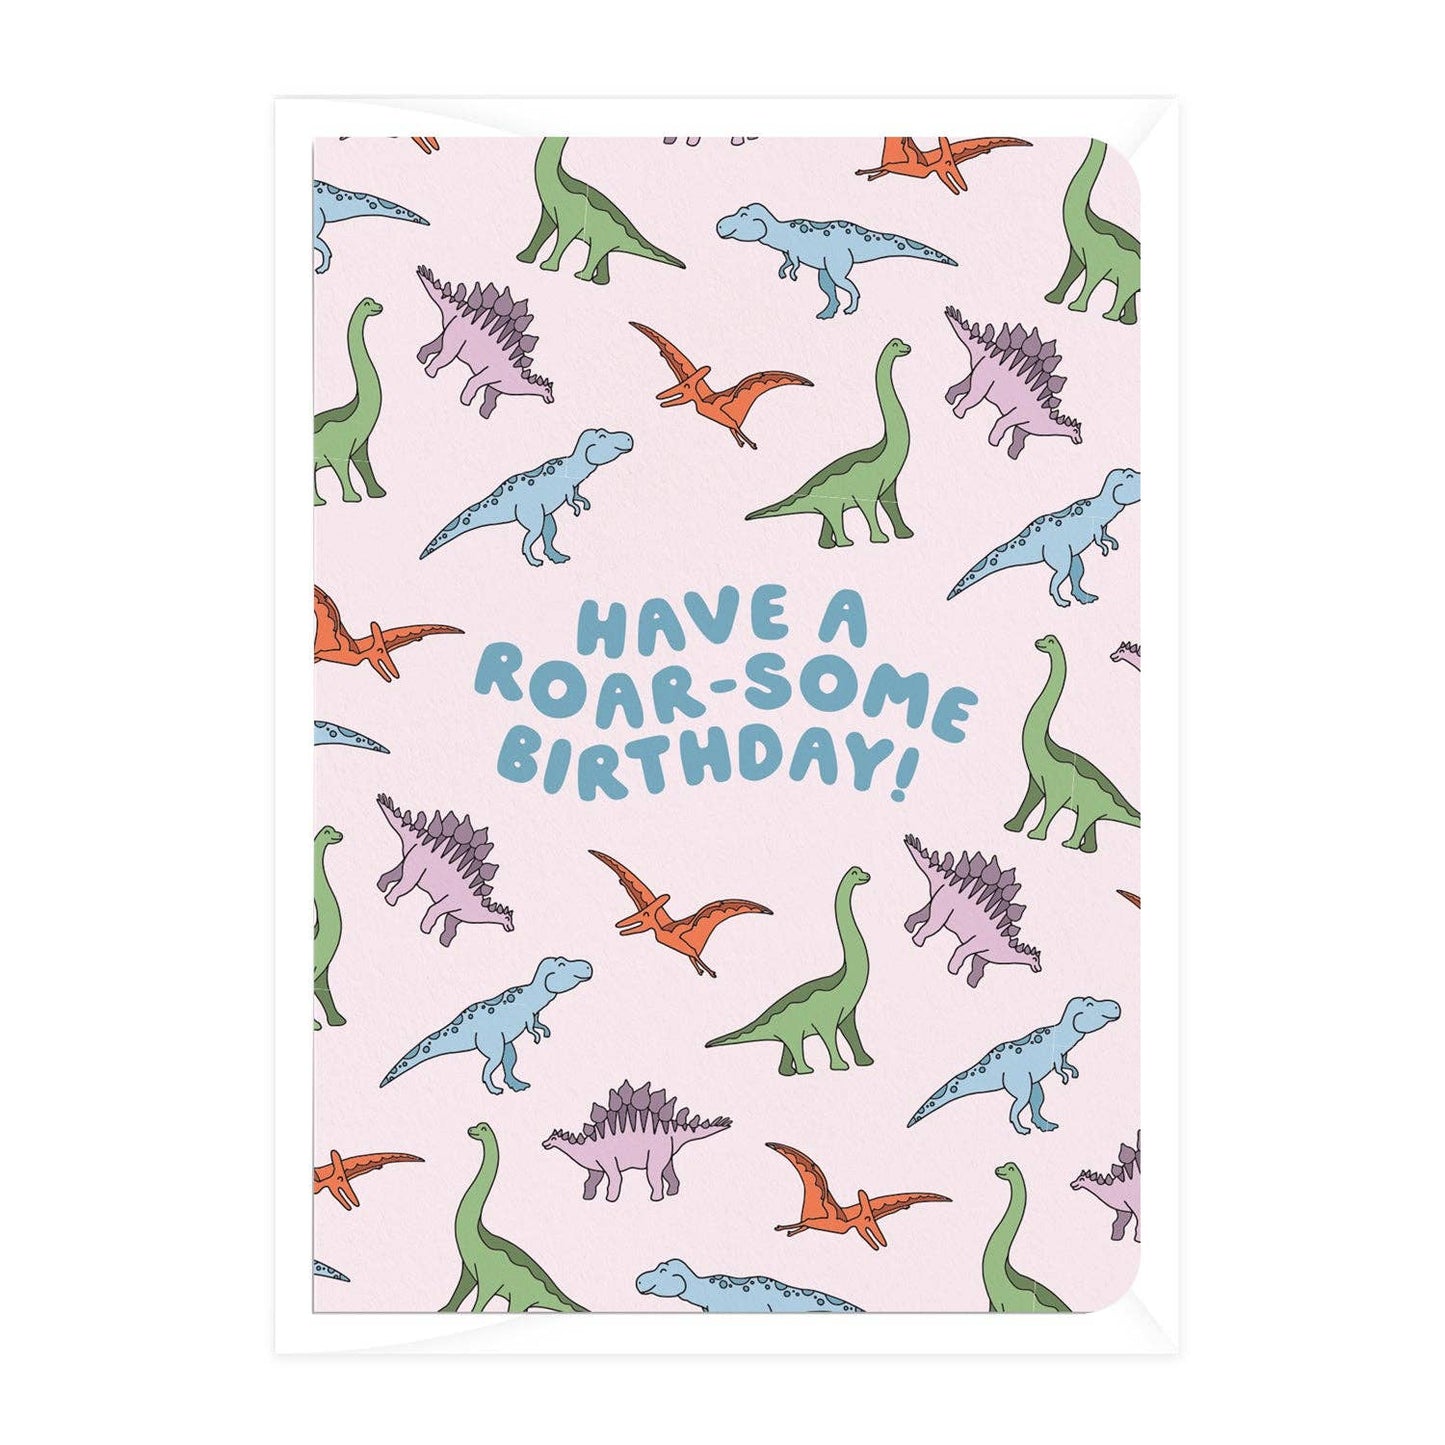 'Have a Roar-some Birthday!' Greeting Card